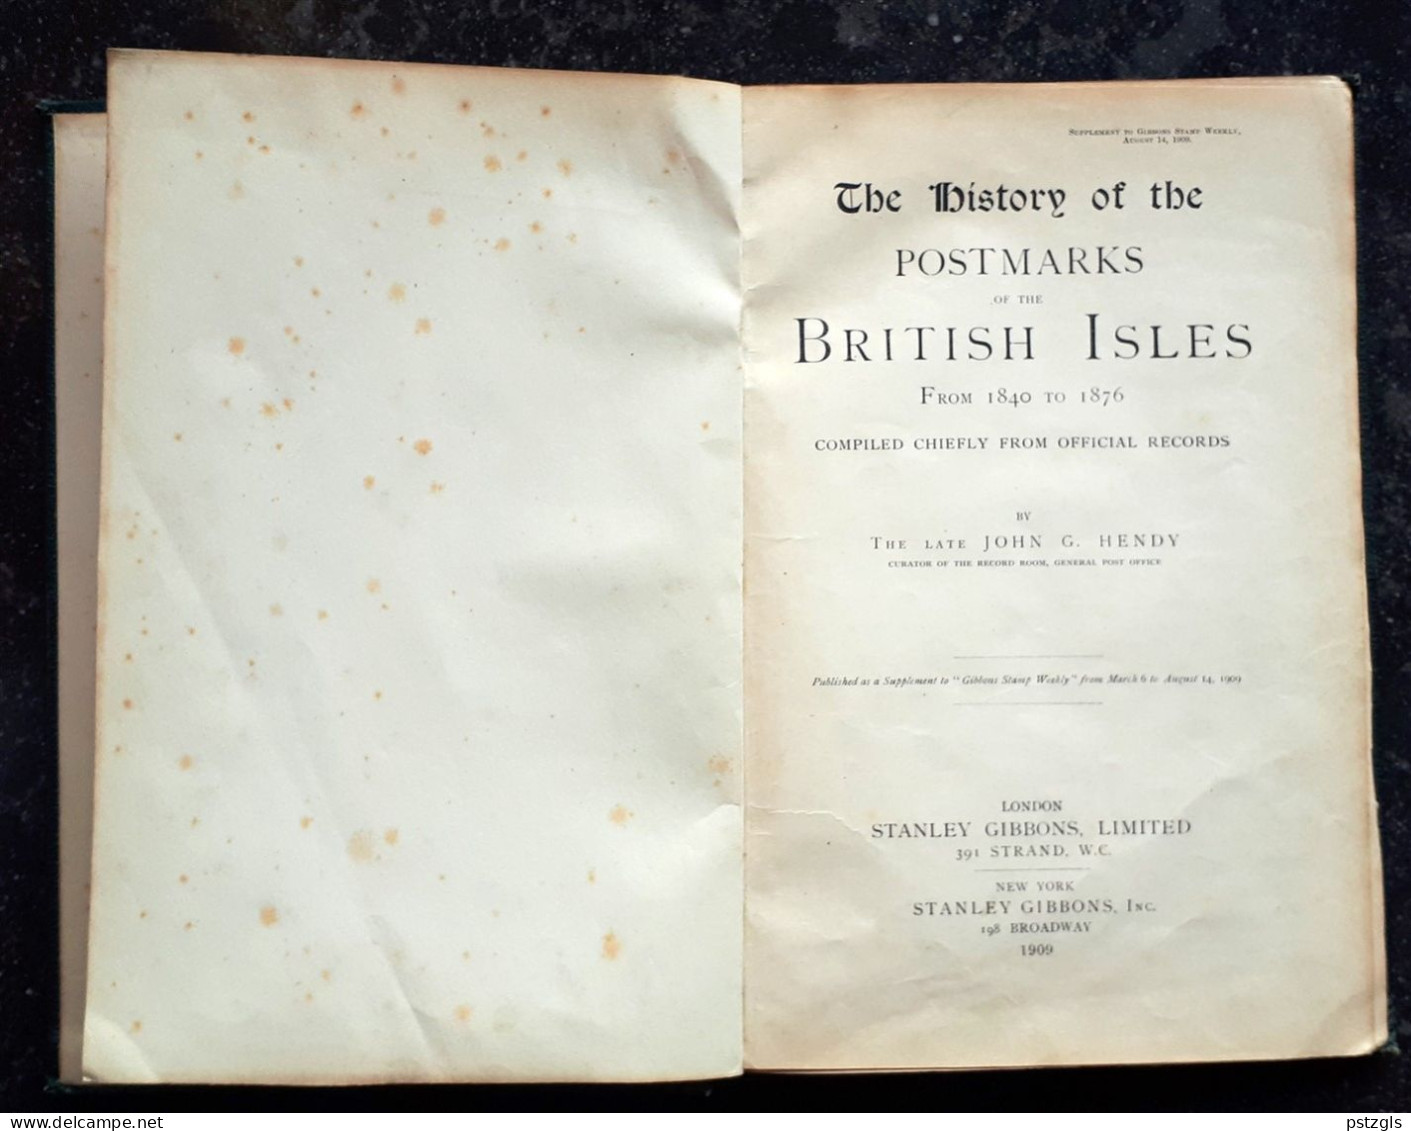 The History Of The Postmarks Of The British Isles From 1840 To 1876 - John G. Hendy - Cancellations